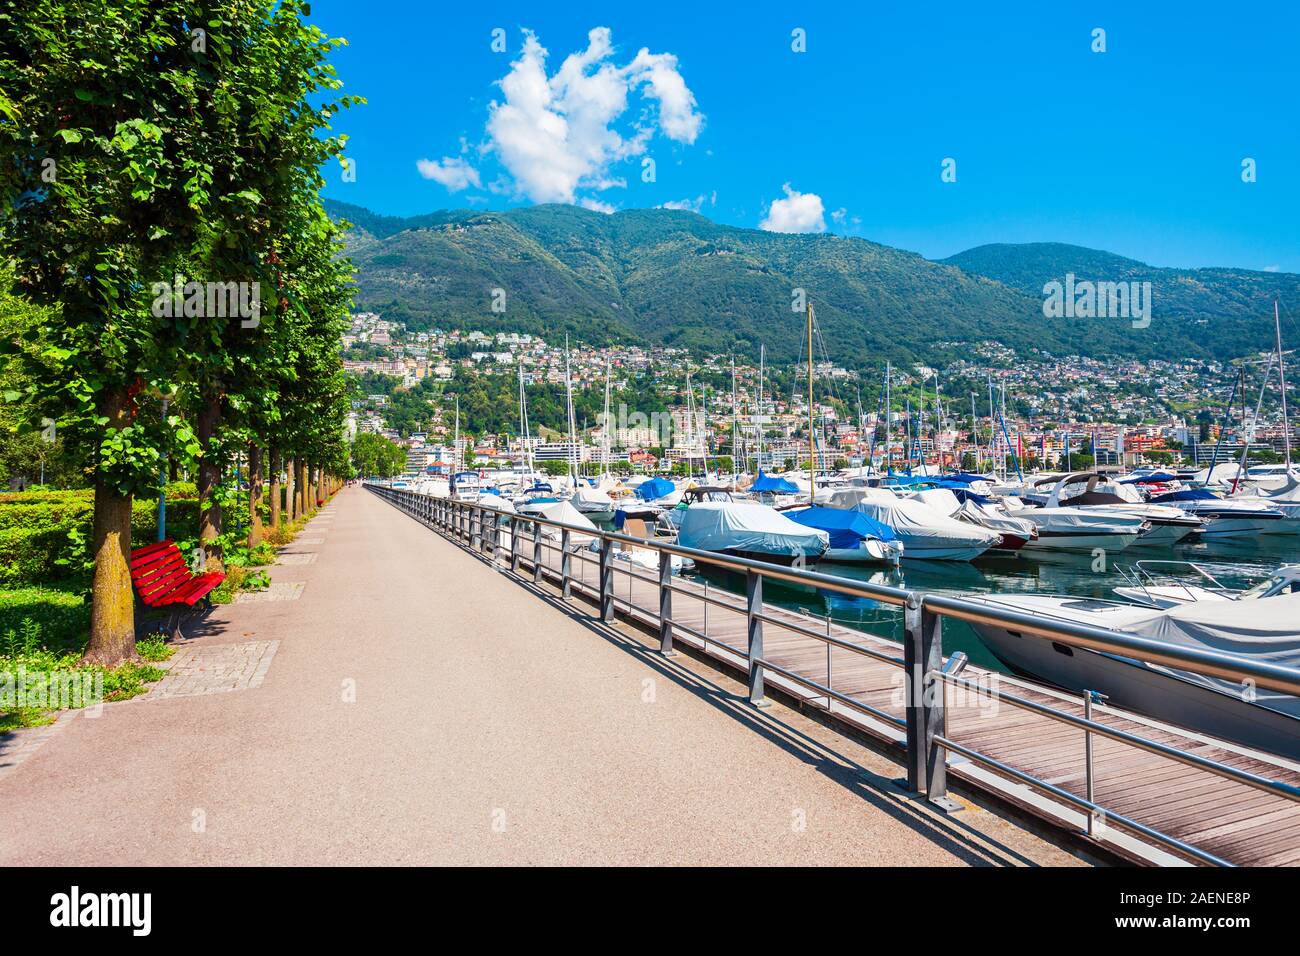 Locarno port with yachts and boats. Locarno is a town located on Lake  Maggiore in Ticino canton of Switzerland Stock Photo - Alamy